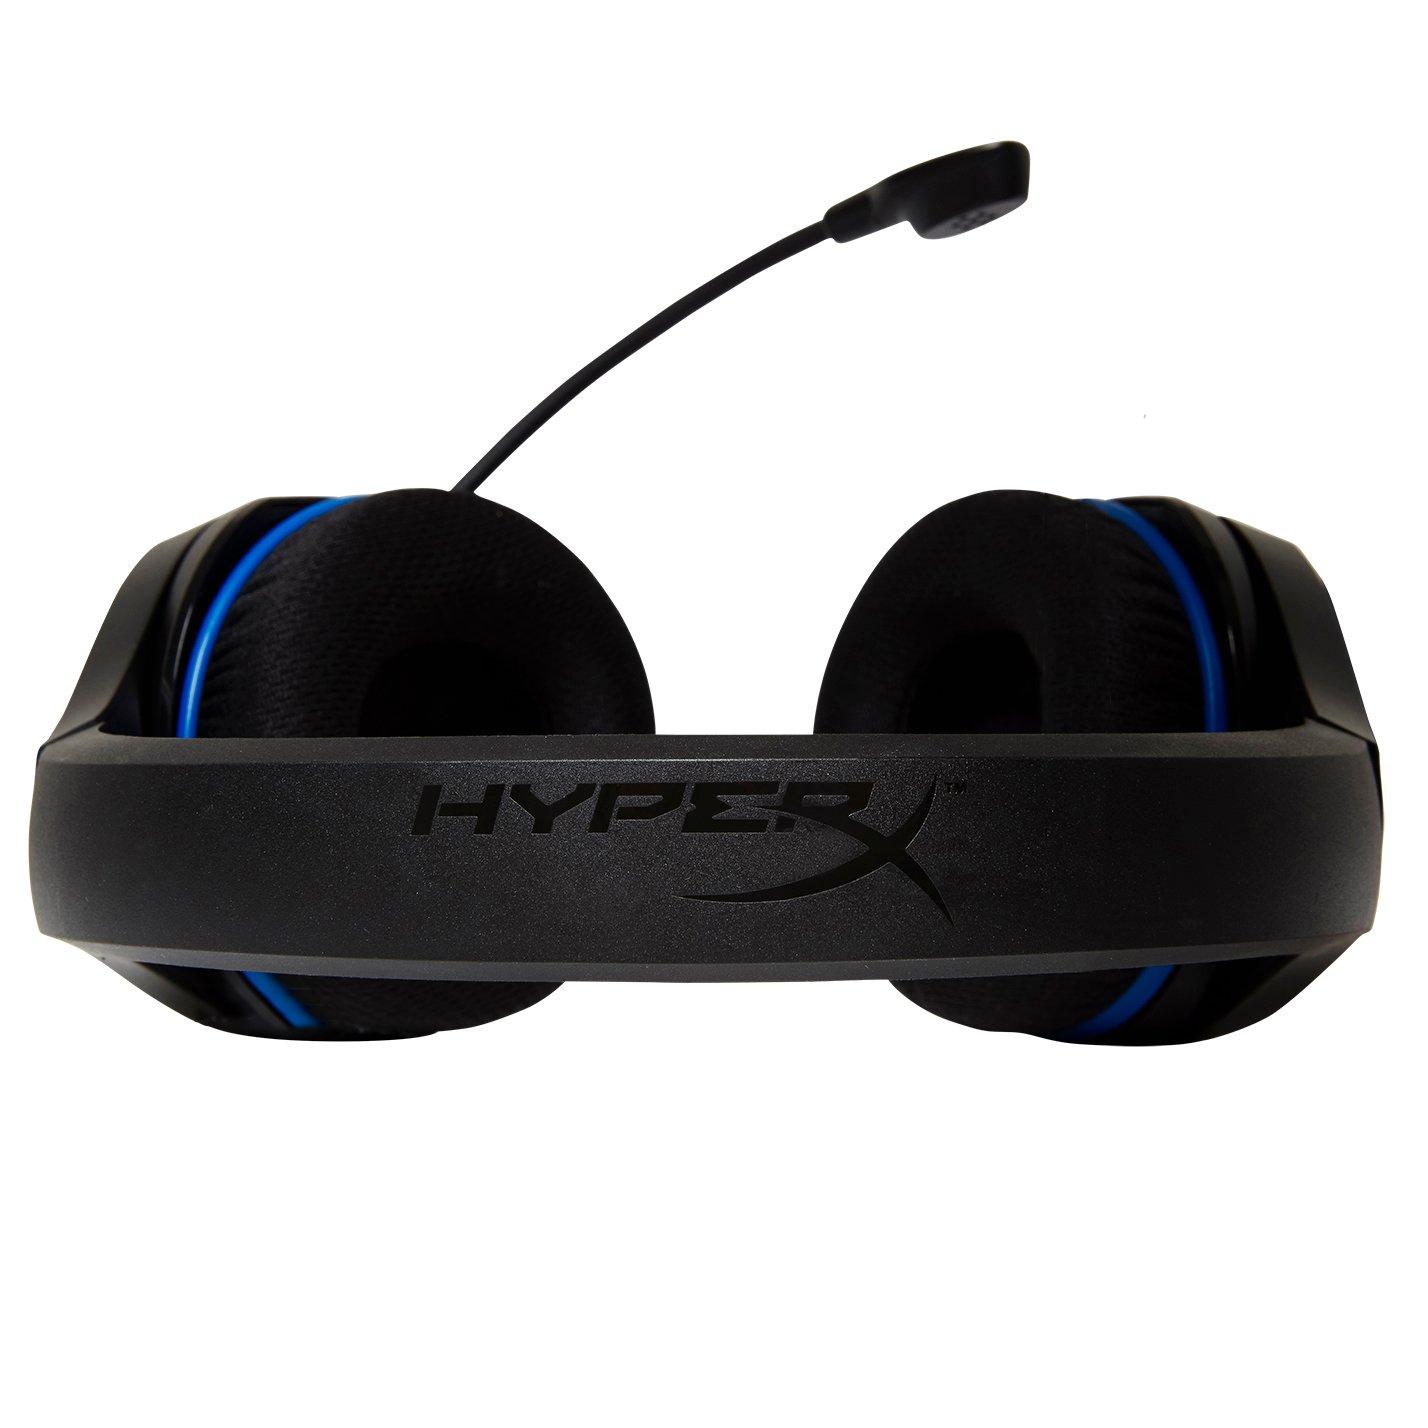 list item 8 of 14 Cloud Stinger Core Wired Gaming Headset for PlayStation 4 and PlayStation 5